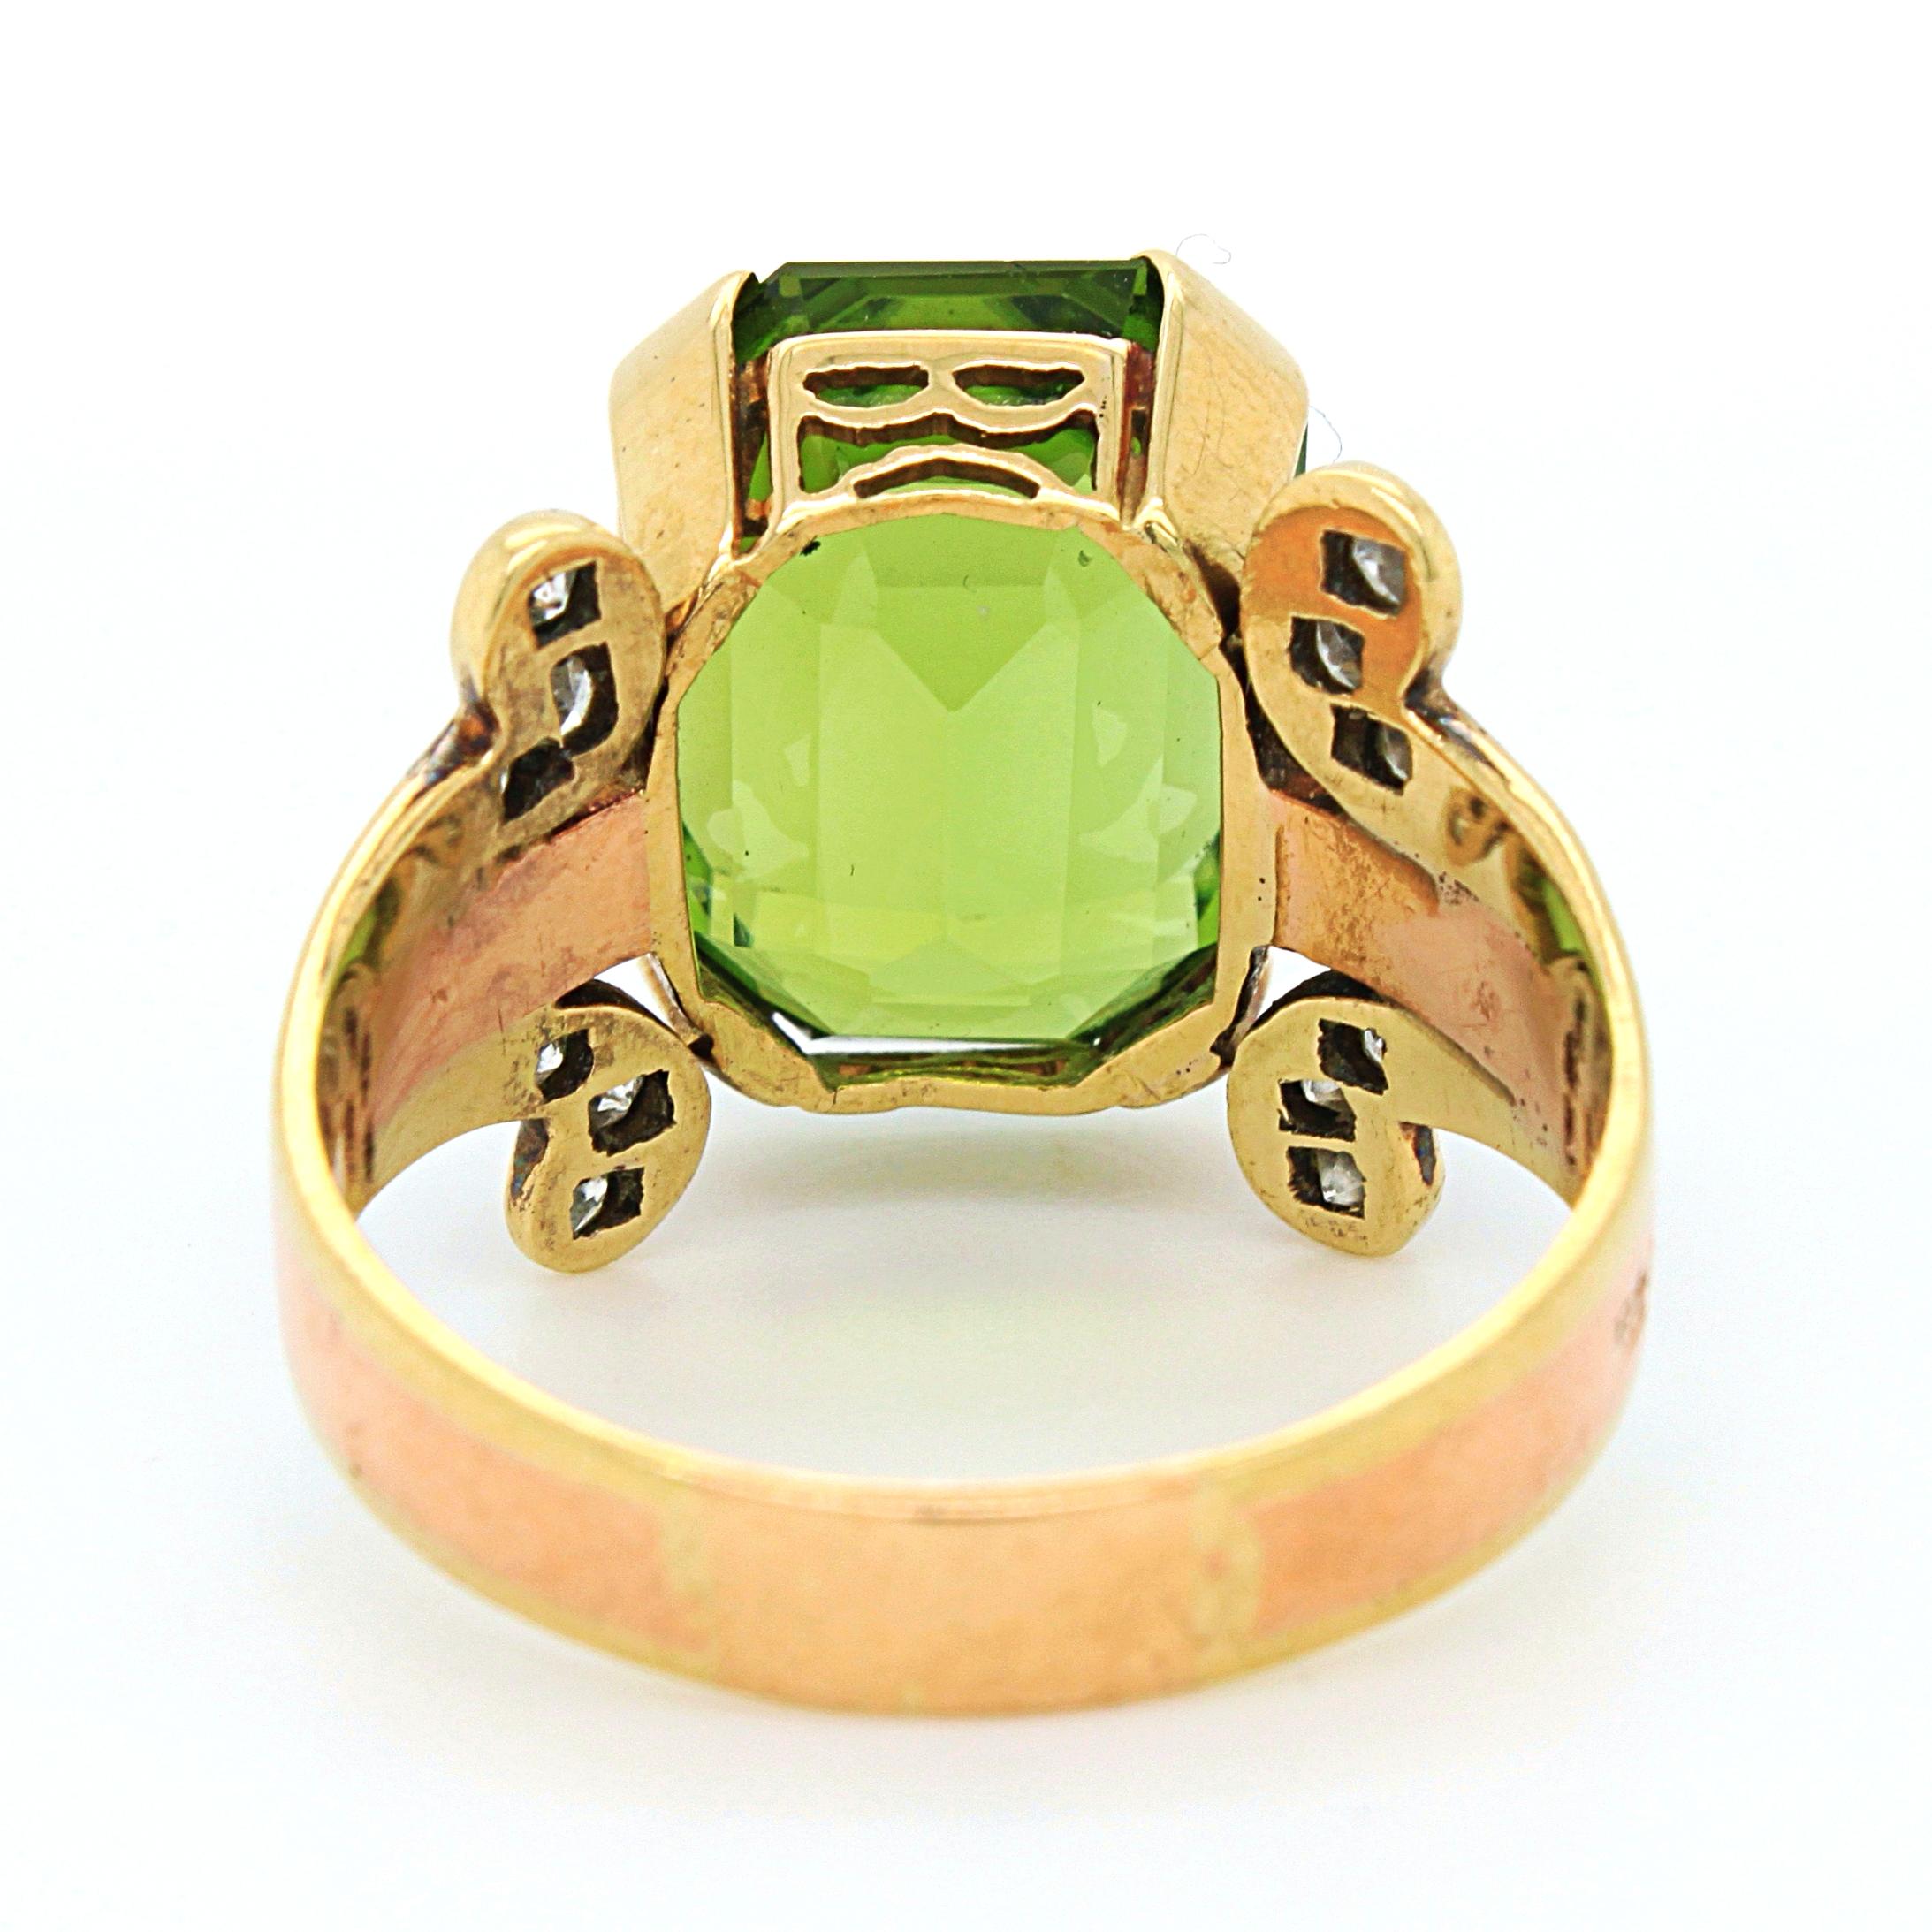 Women's Vivid Peridot and Diamond Ring in Yellow and Red Gold, ca. 1950s